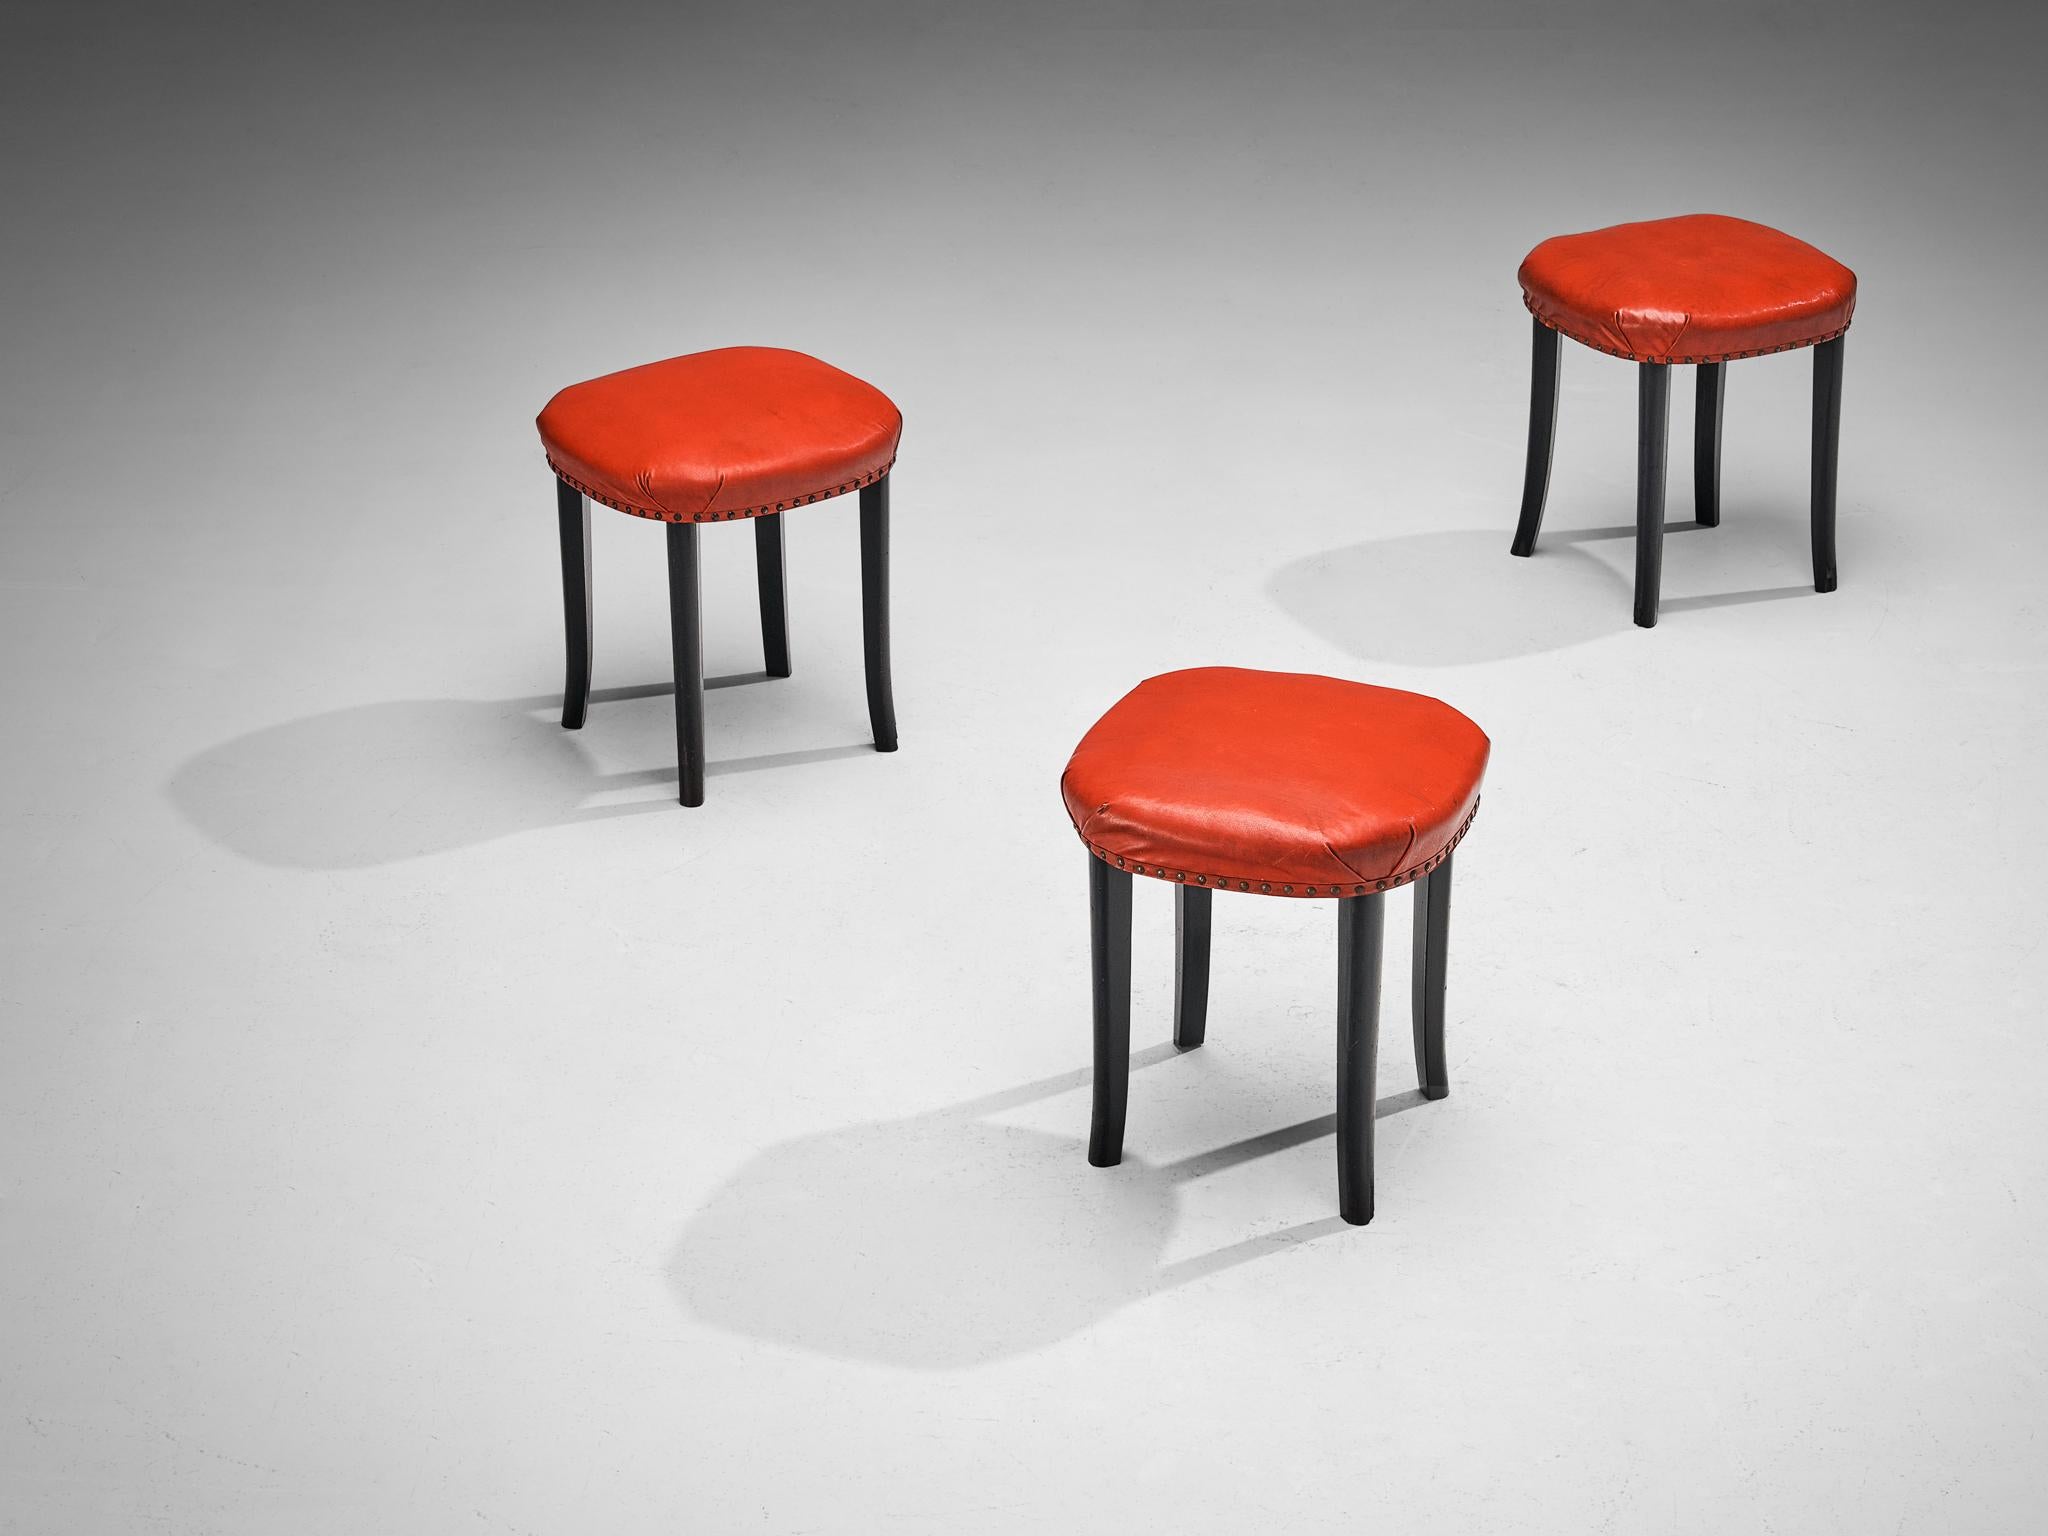  Stools, faux leather, metal, stained beech, Europe, 1930s

Set of three stools made in Europe in the Art Deco period. These stools are interesting in their design due to the square shape the seats show. The items are upholstered in a bright red